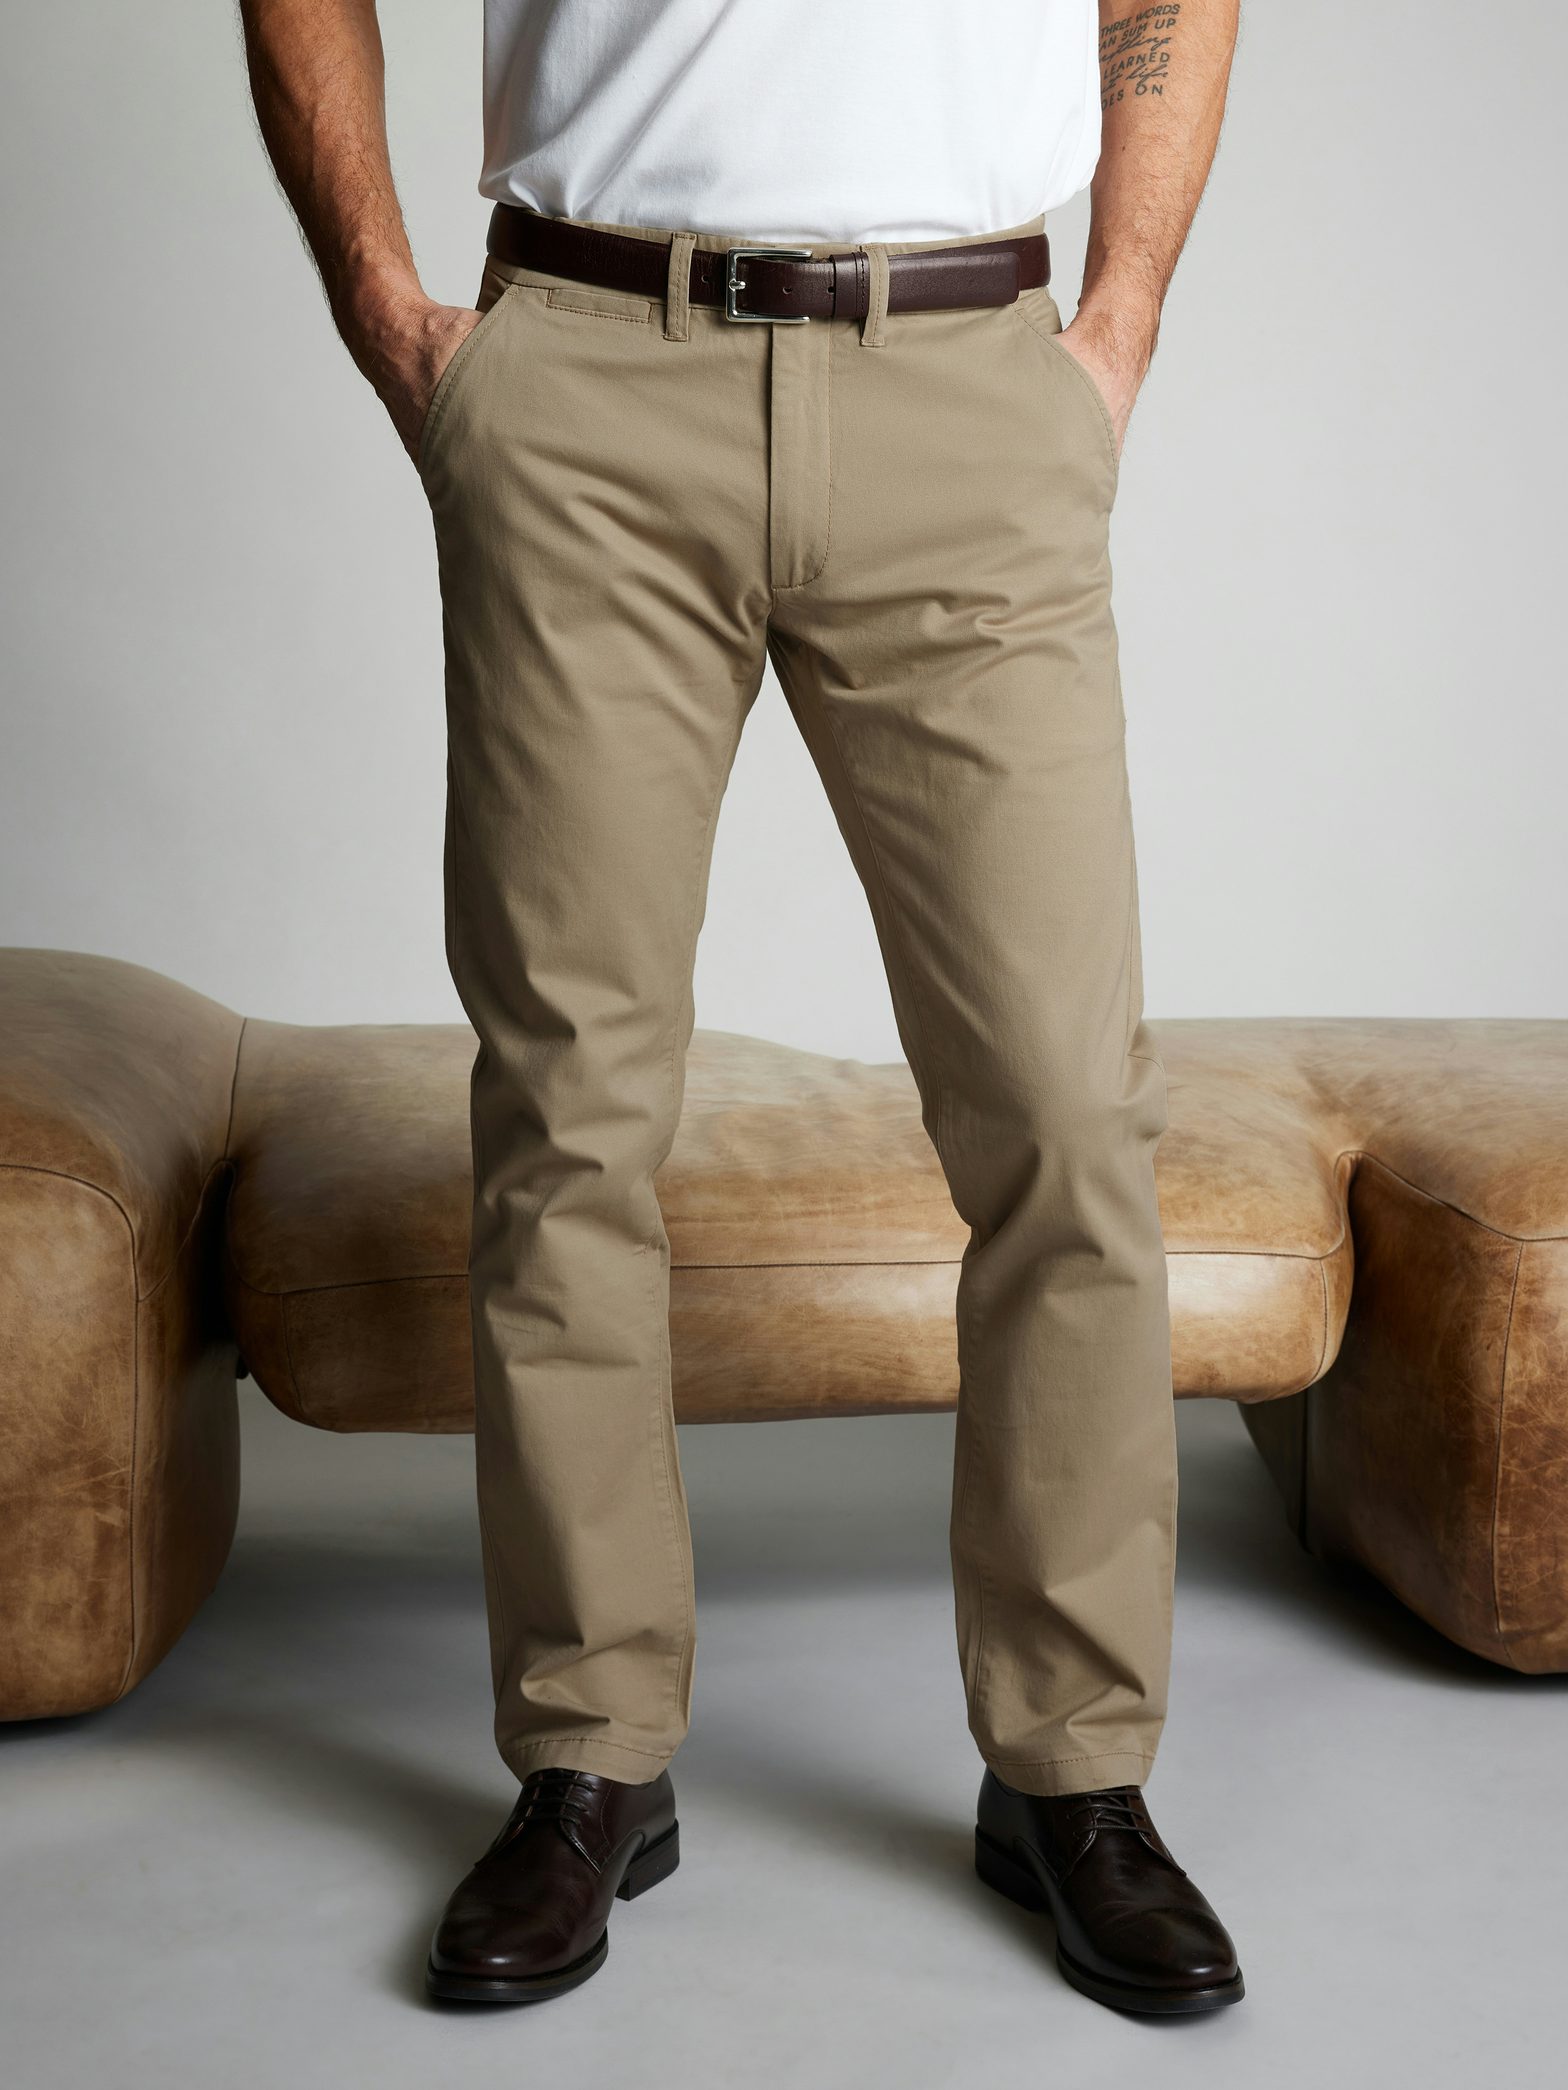 Buy Beige Khaki Stretch Chinos For Men Online In India